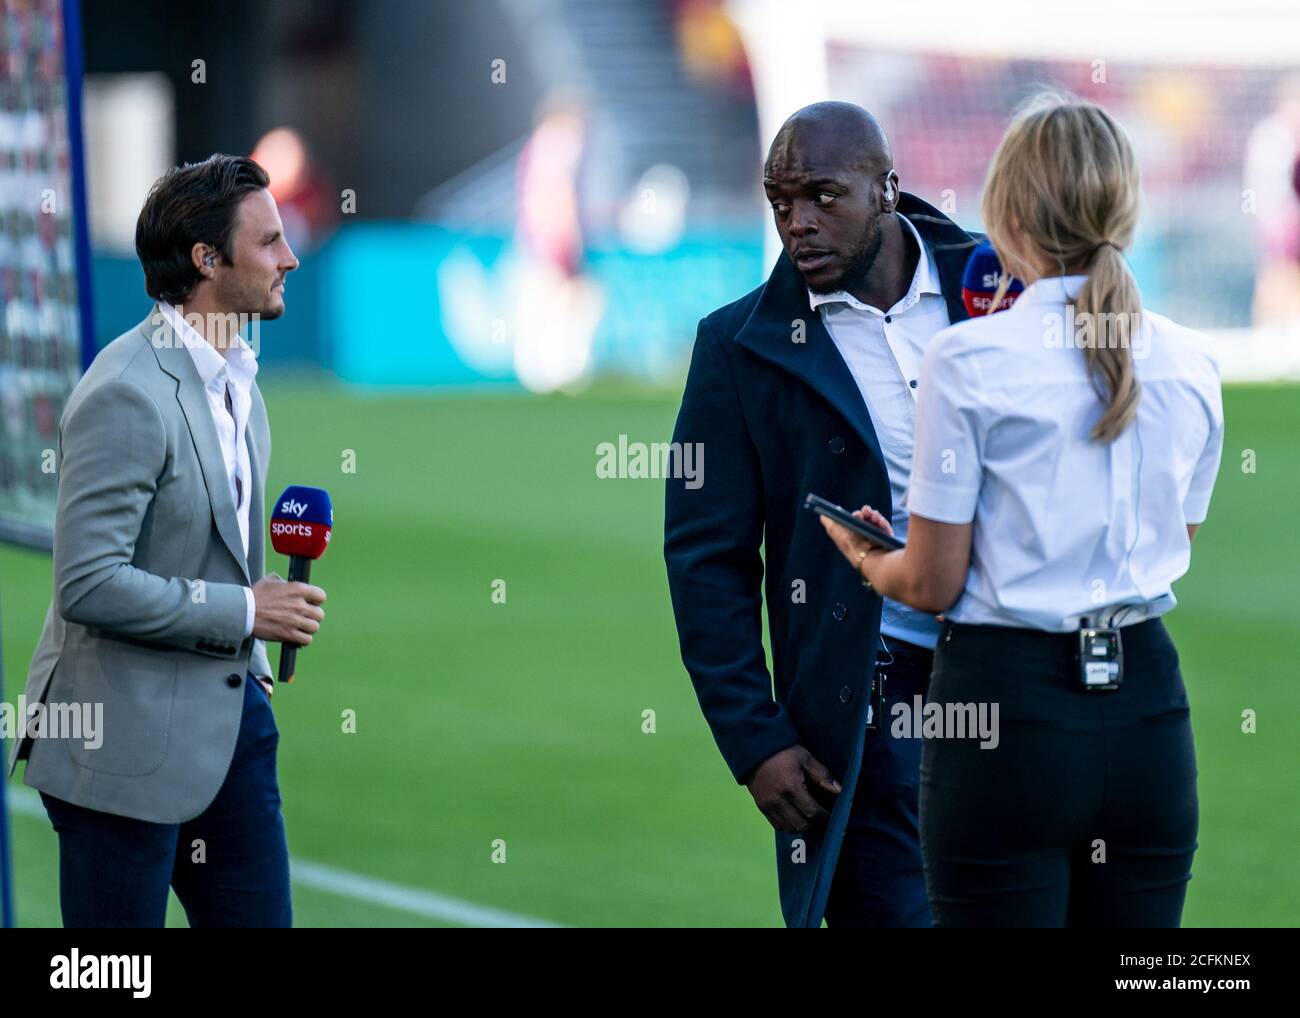 Brentford, UK. 06th Sep, 2020. Adebayo Akinfenwa of Wycombe Wanderers as a pundit on Skysports during the Carabao Cup 1st round match behind closed doors between Brentford and Wycombe Wanderers at the Brentford Community Stadium, Brentford, England on 6 September 2020. Photo by Liam McAvoy/PRiME Media Images. Credit: PRiME Media Images/Alamy Live News Stock Photo